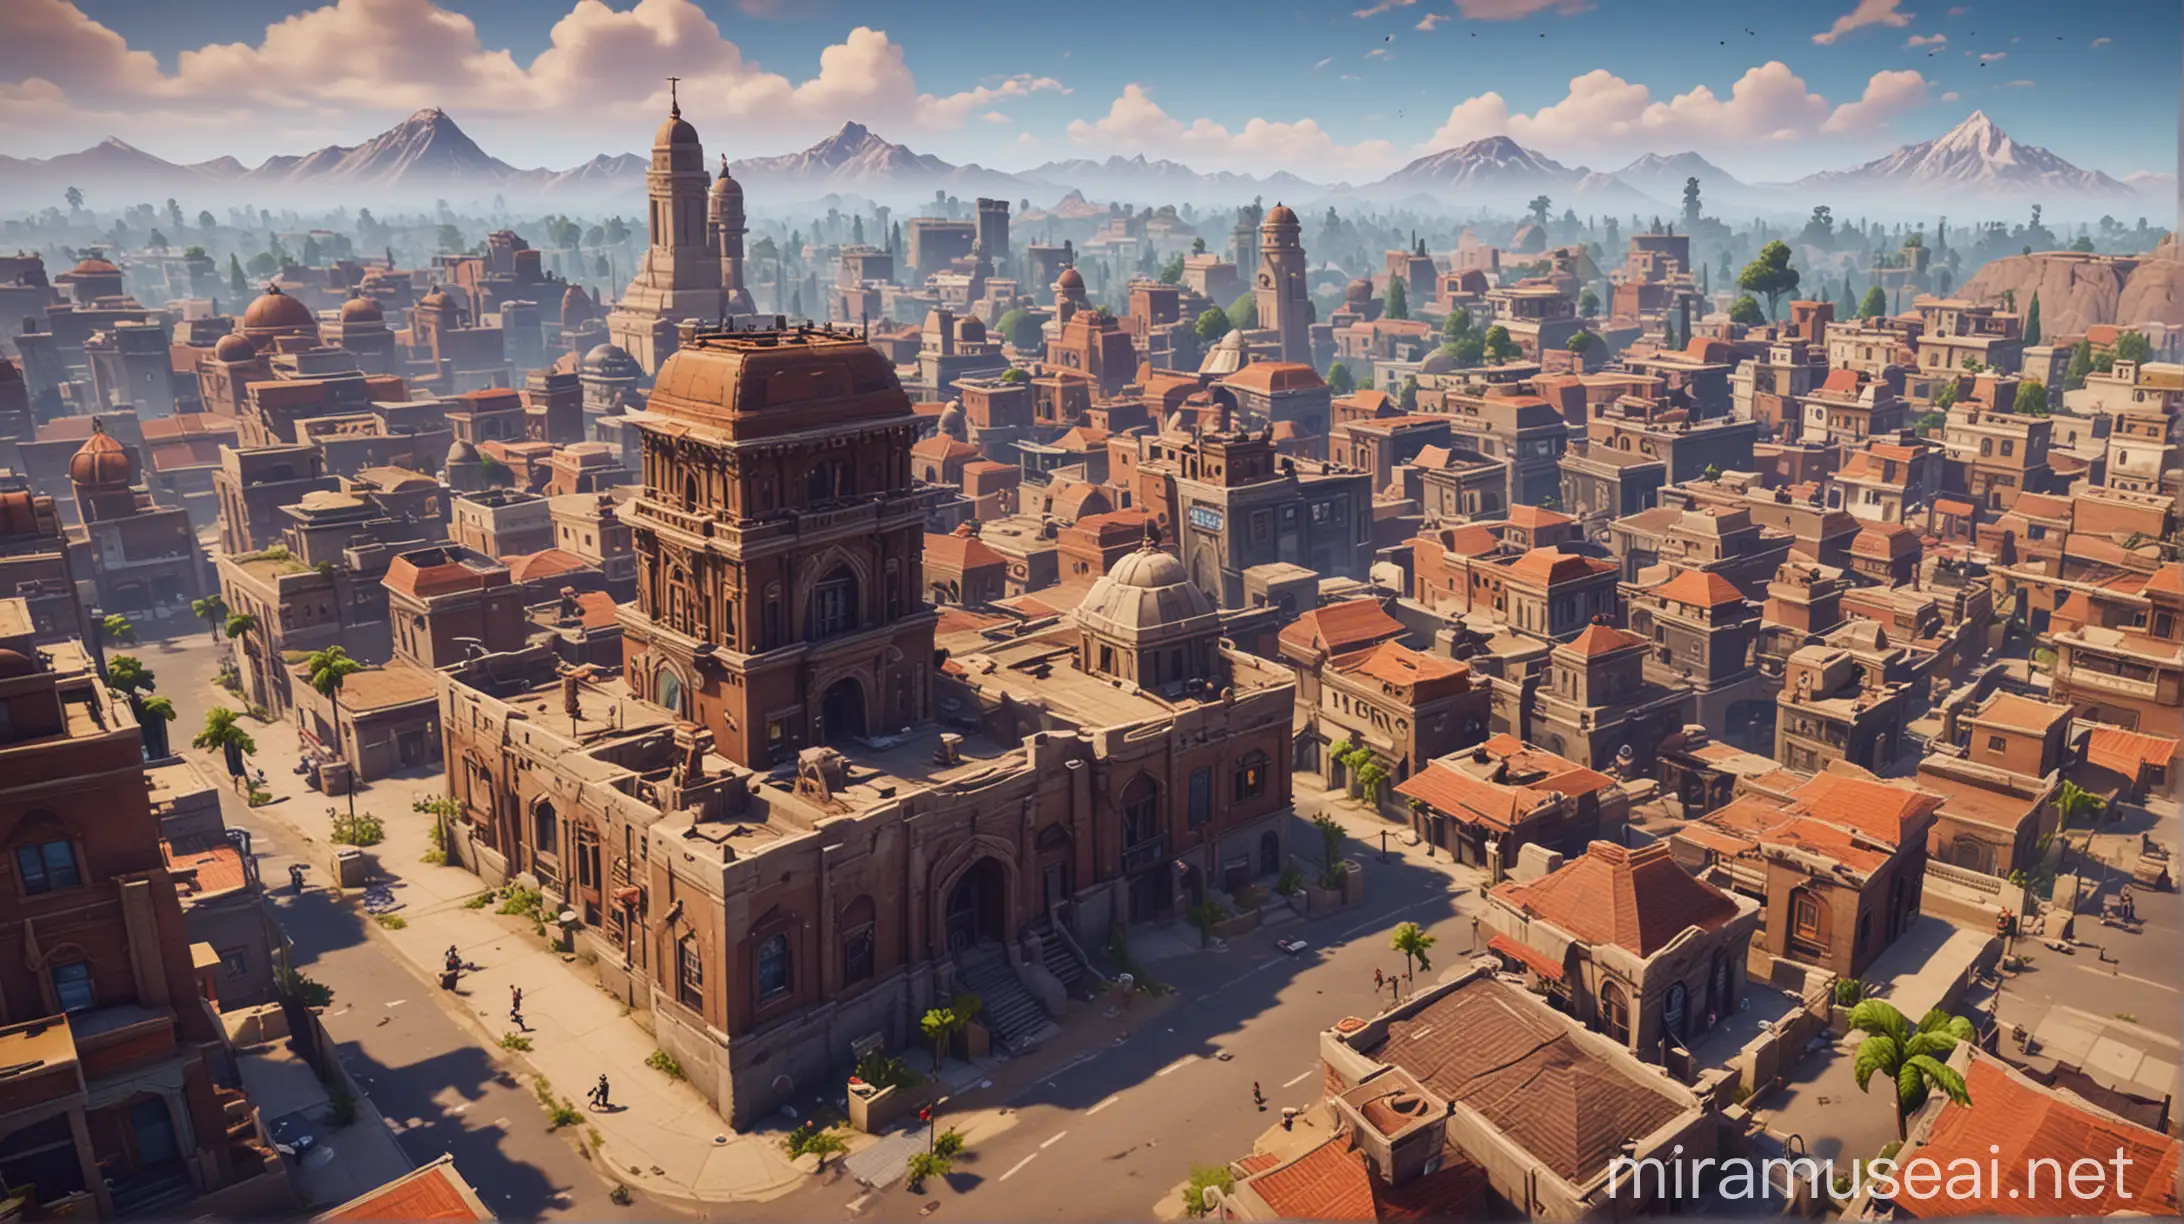 Fortnite Tilted Towers and Indian Architecture Comparison